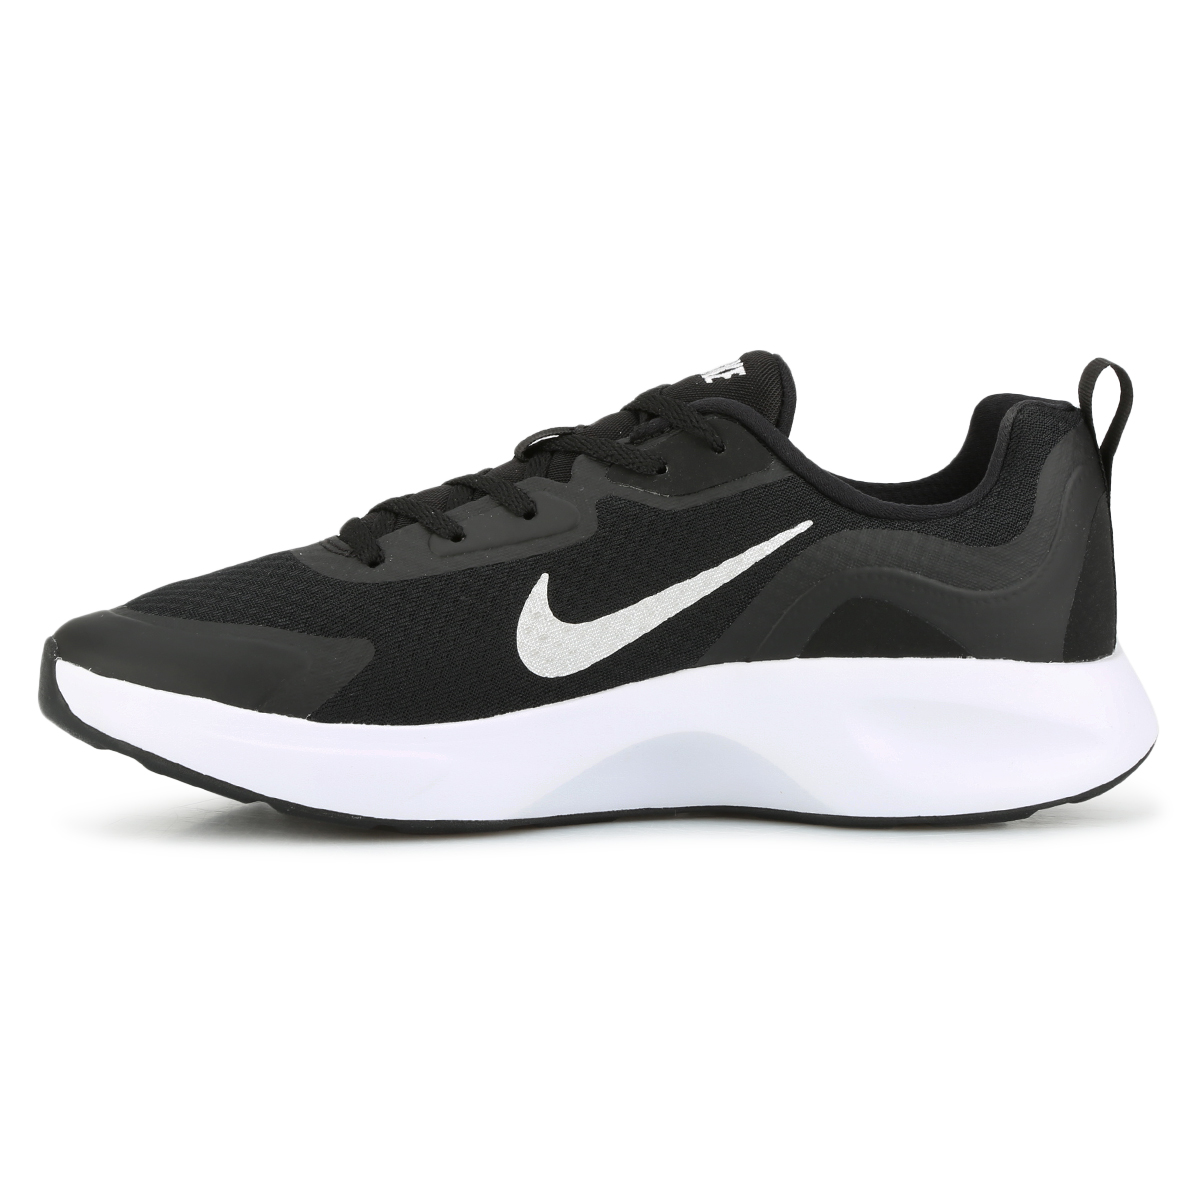 Zapatillas Nike Wearallday,  image number null